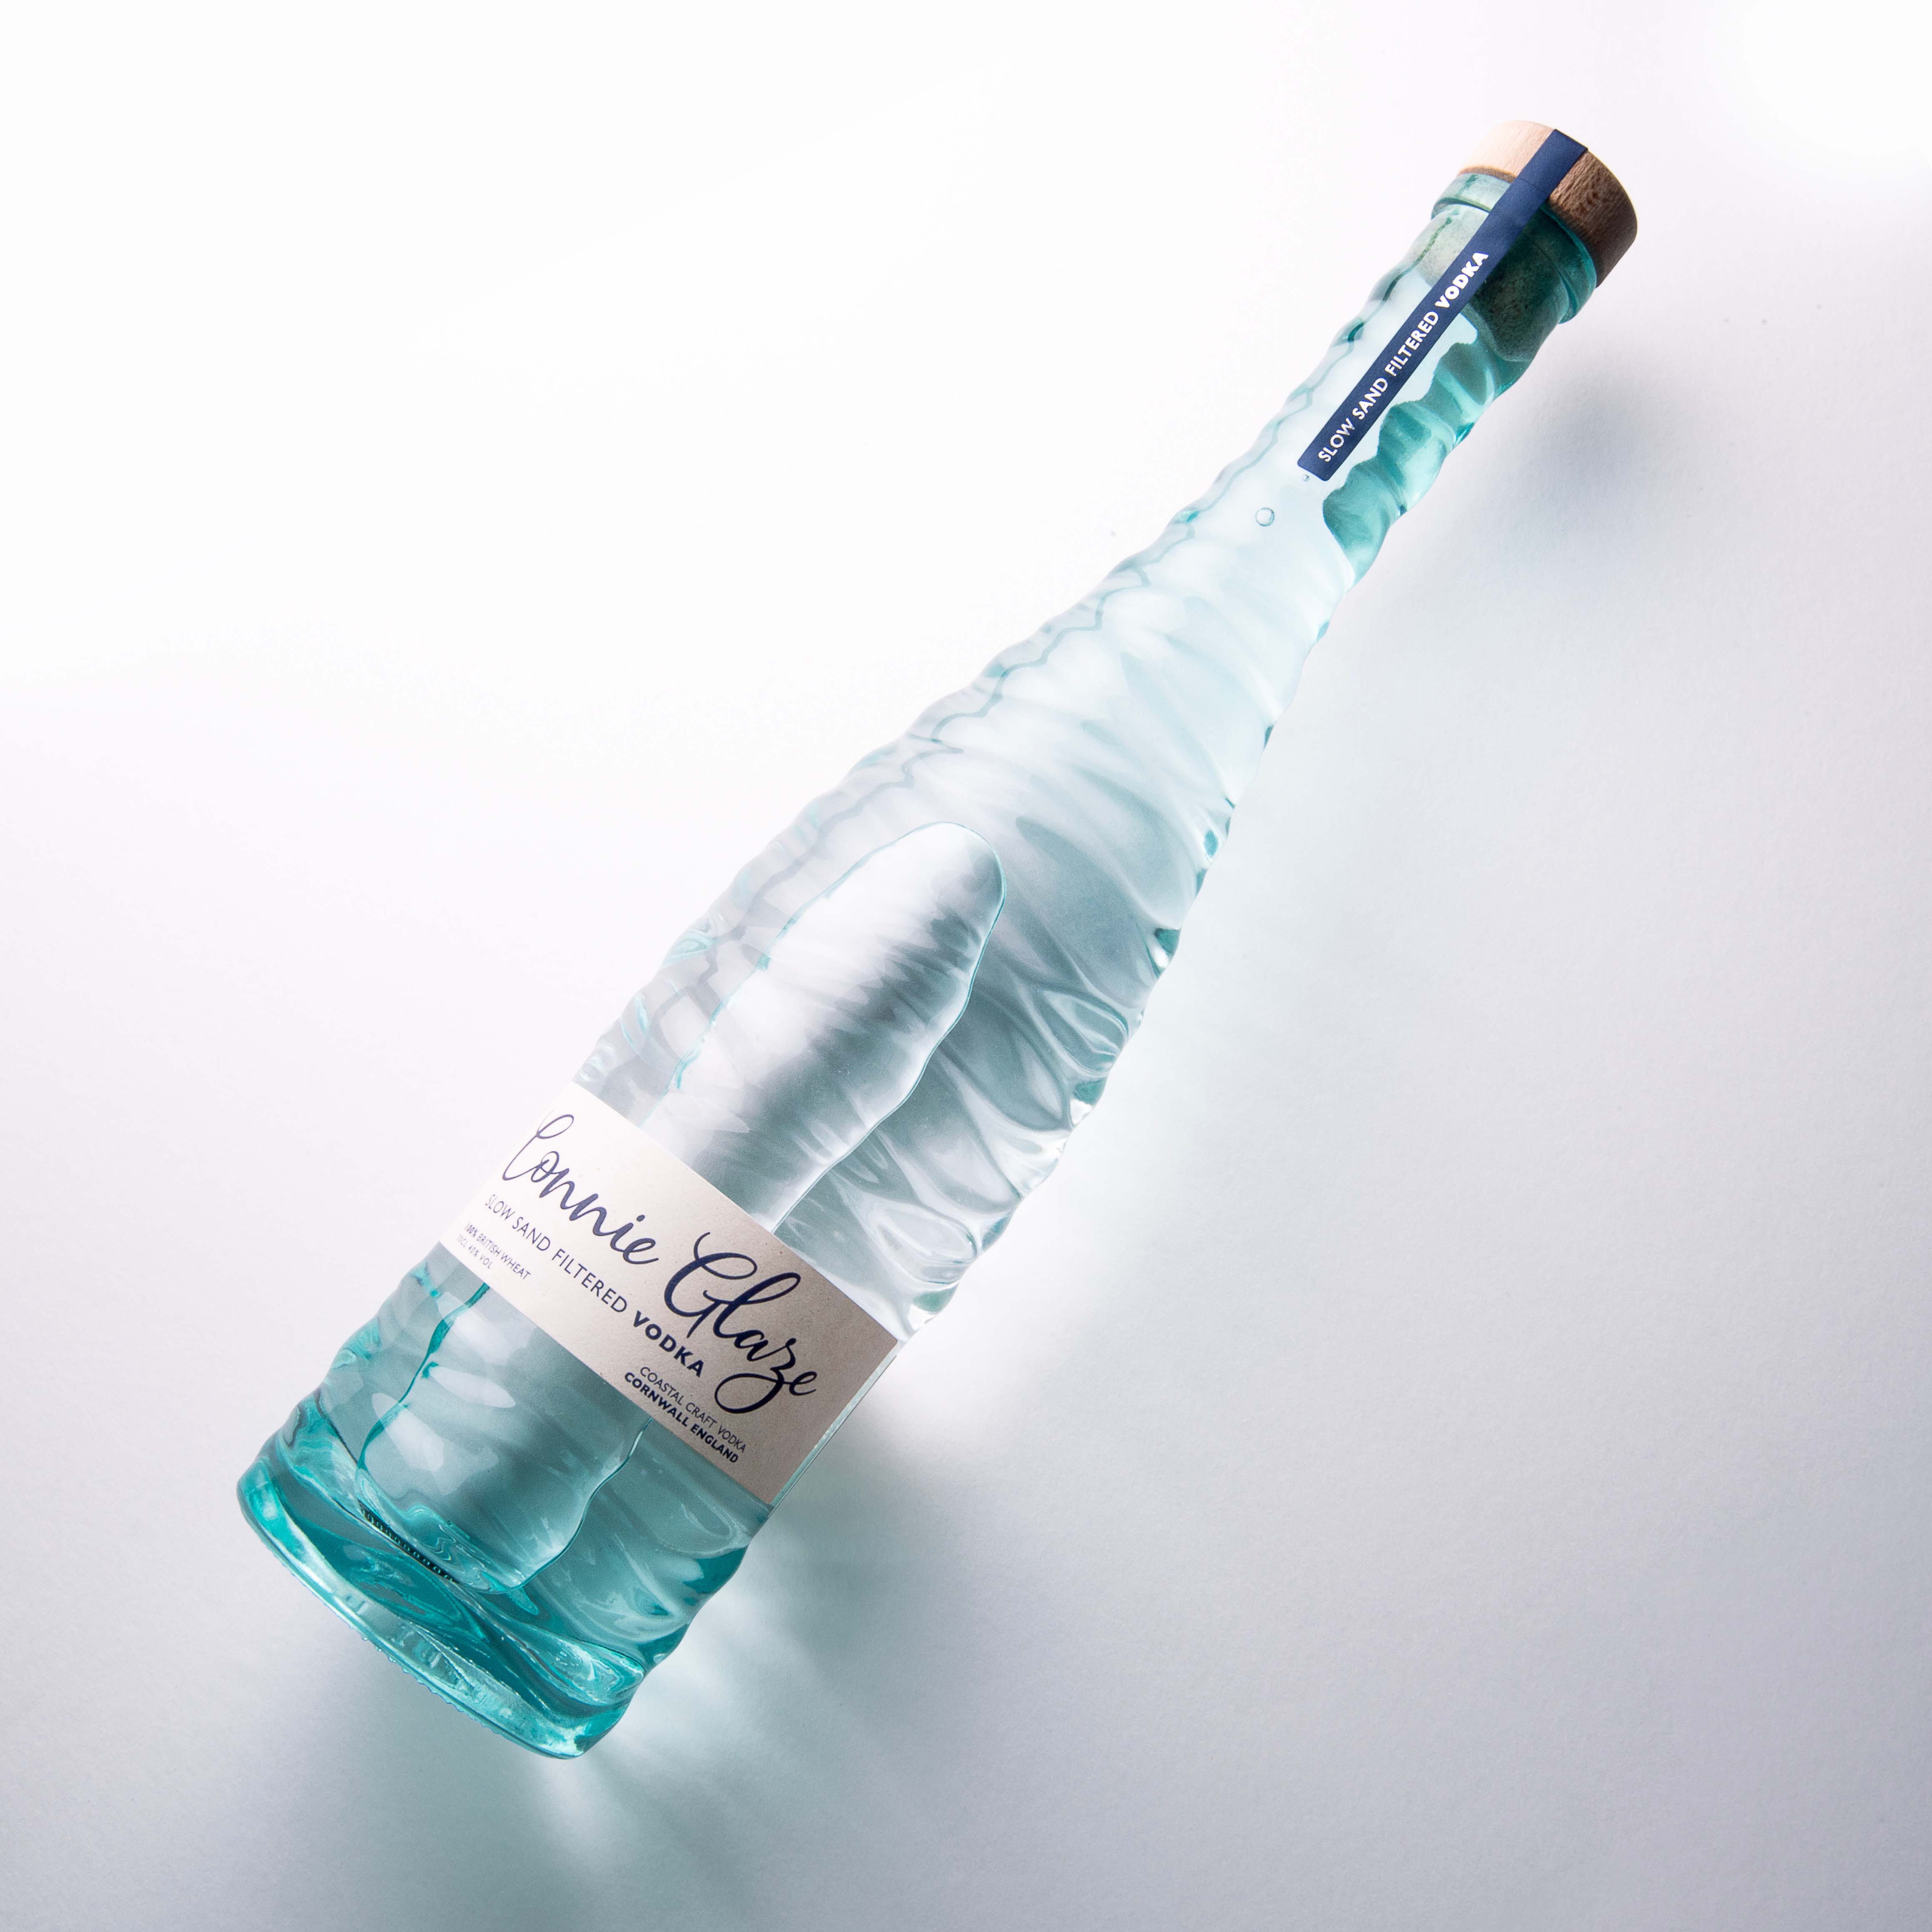 Slowly Crafted and Gently Sculpted – Connie Glaze Vodka